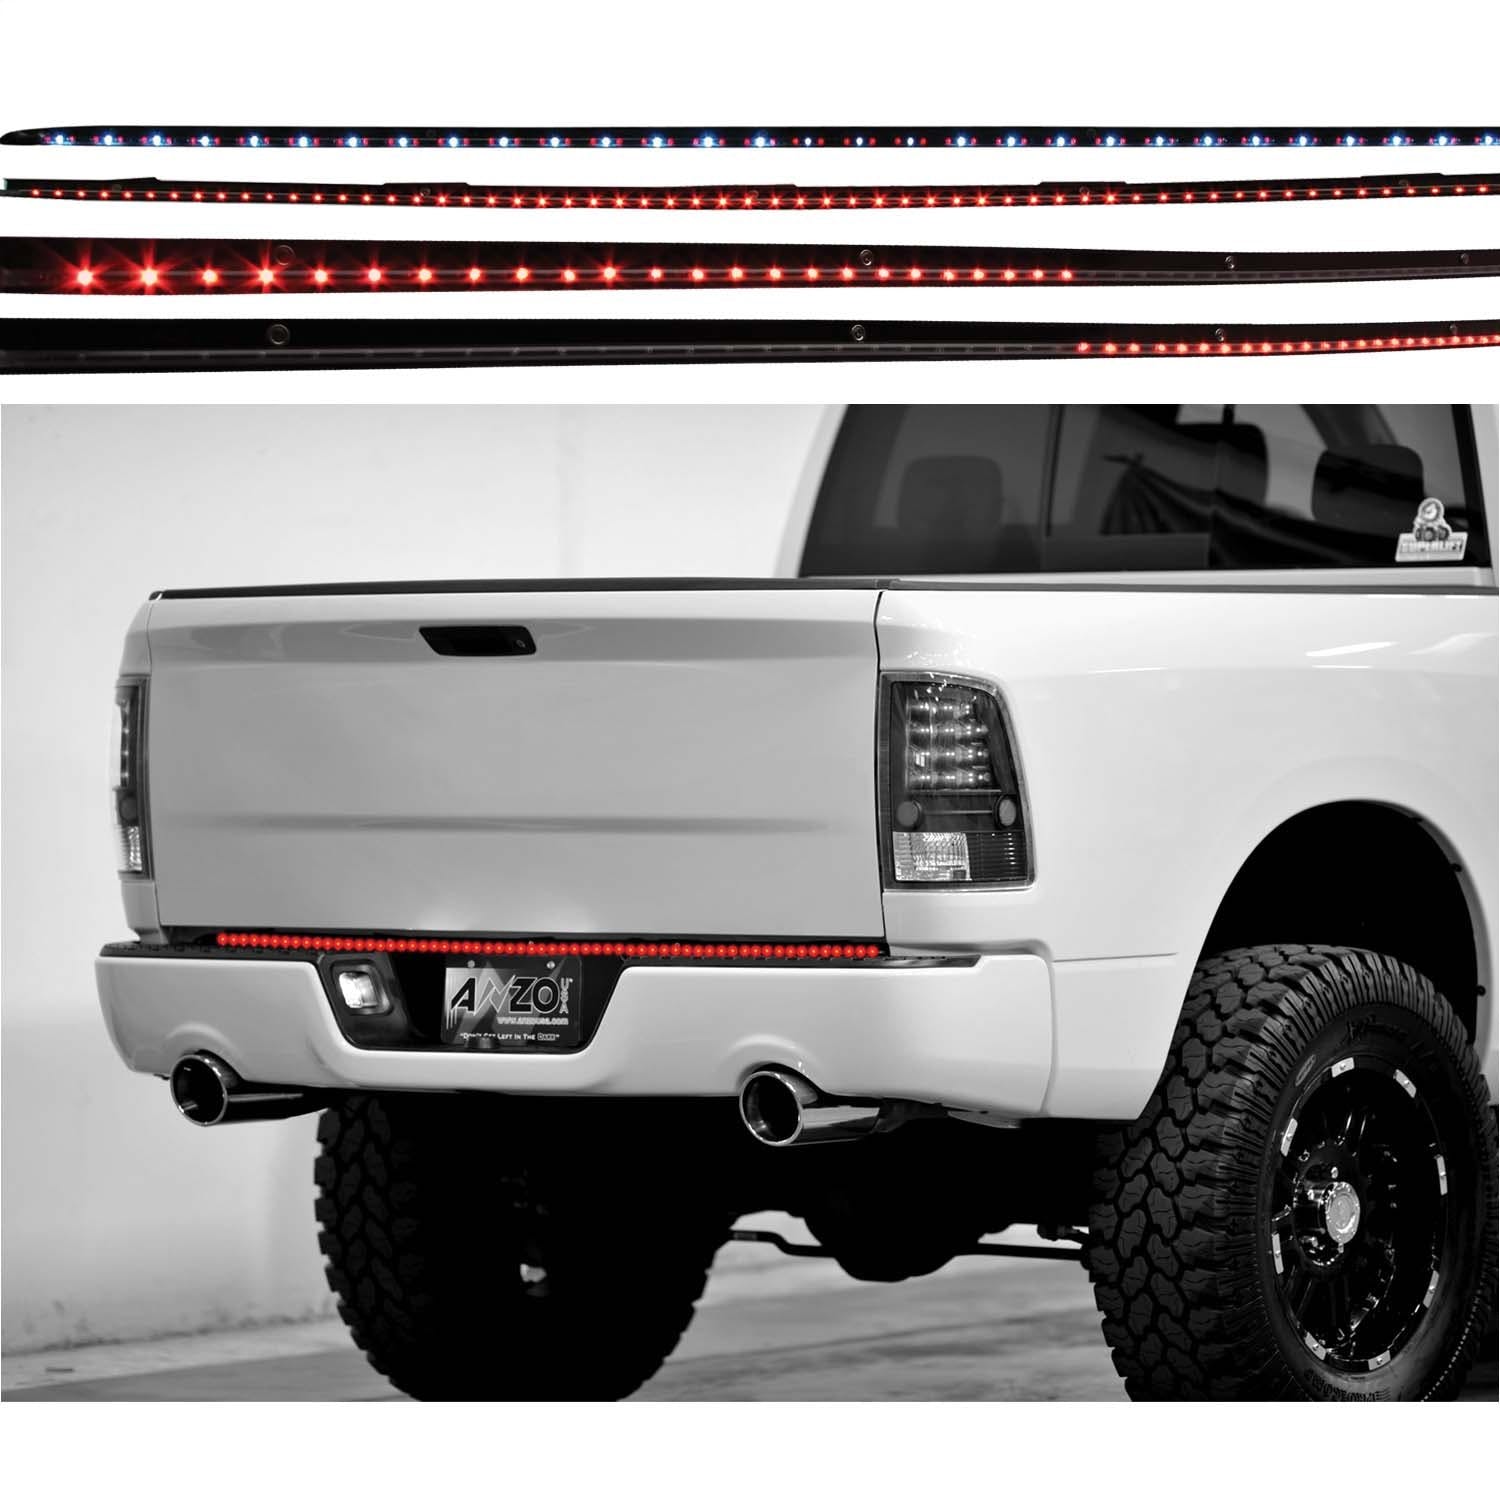 AnzoUSA 531058 LED Tailgate Bar with Amber Scanning, 60" 6 Function